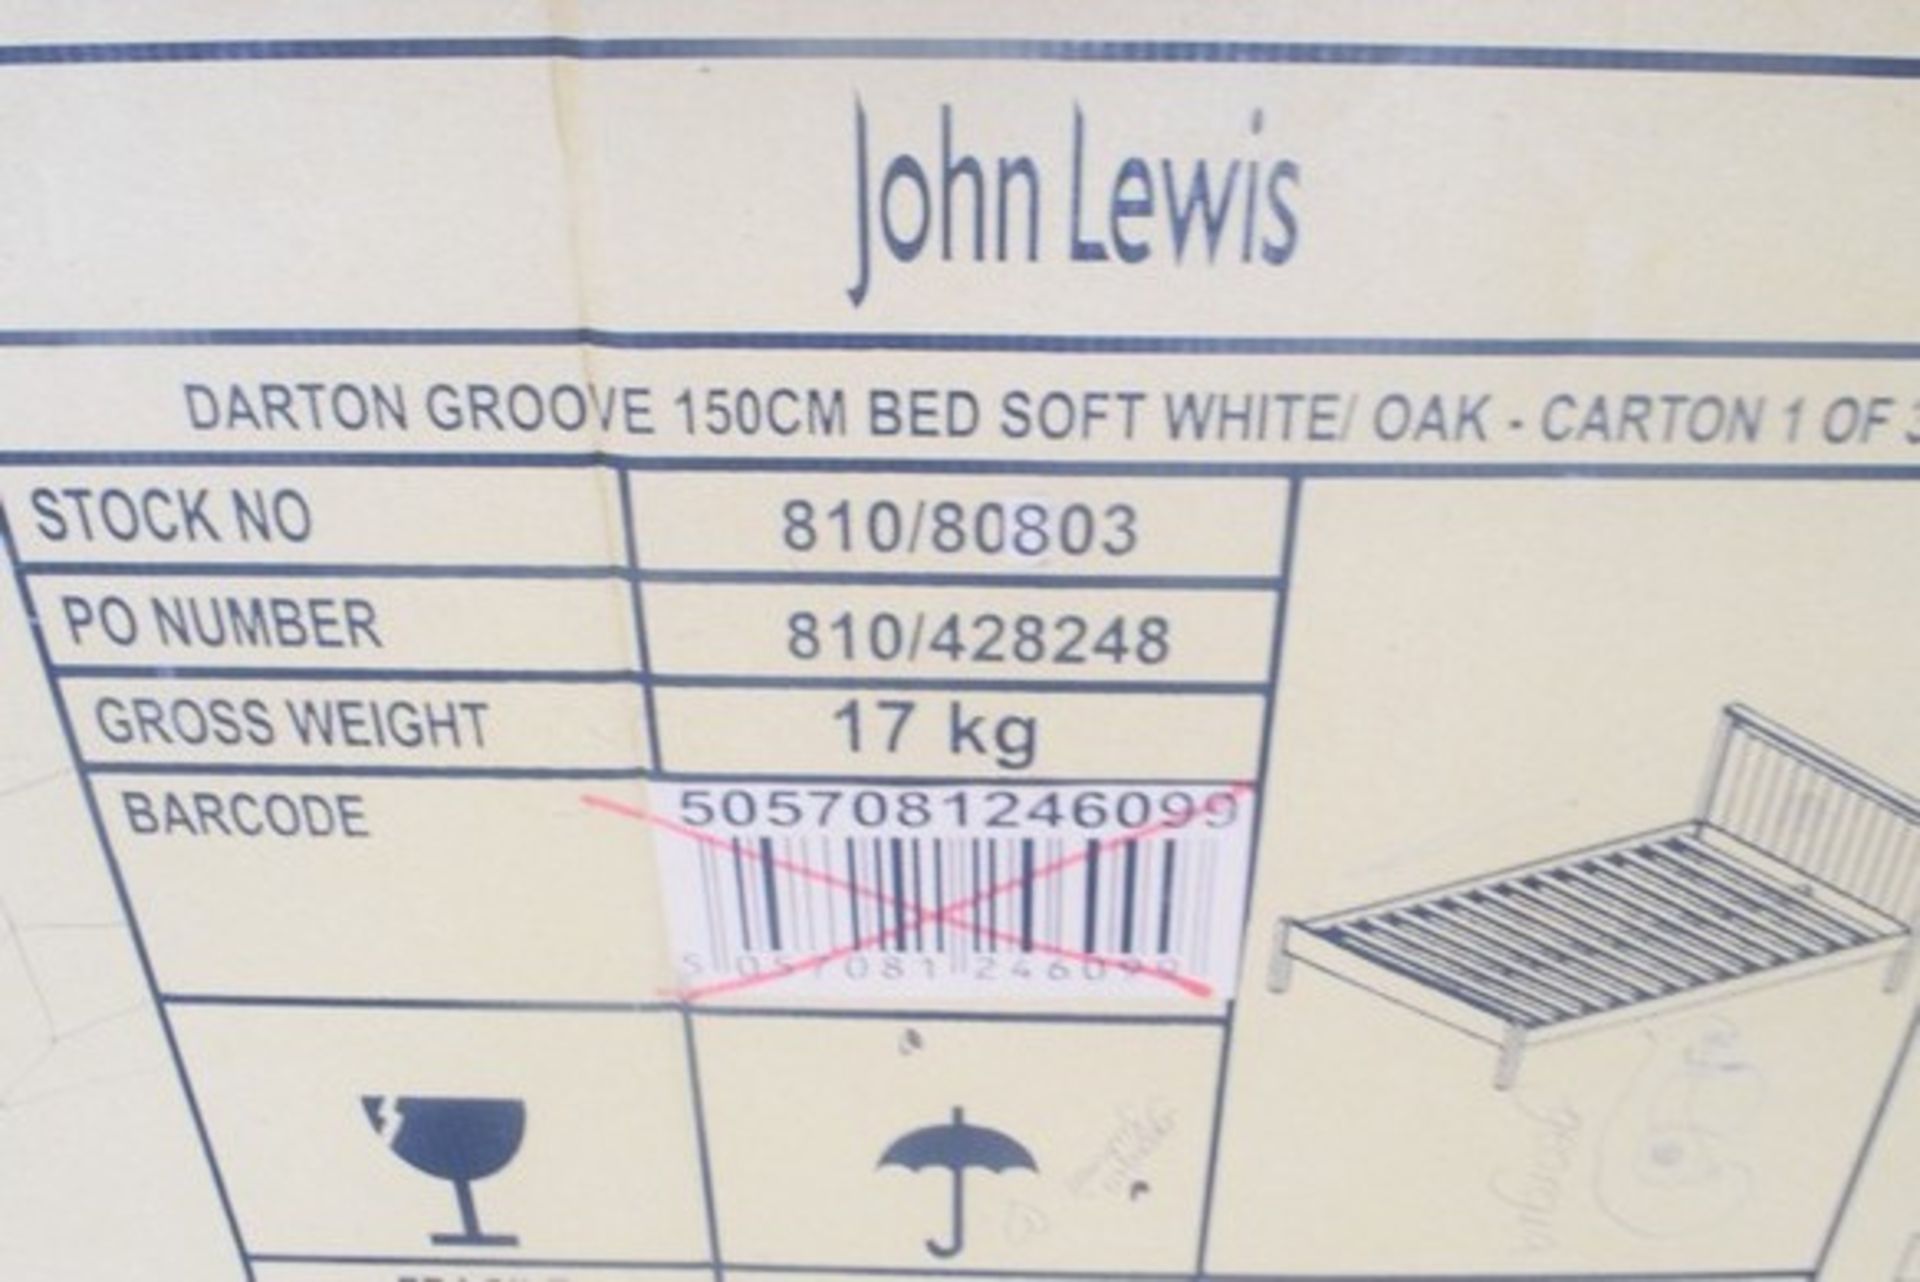 12 x BOXES OF DARTINGROVE 150CM BED SOFT WHITE AND OAK (PART 1 OF 3 ONLY) RRP £40 15.06.17 *PLEASE